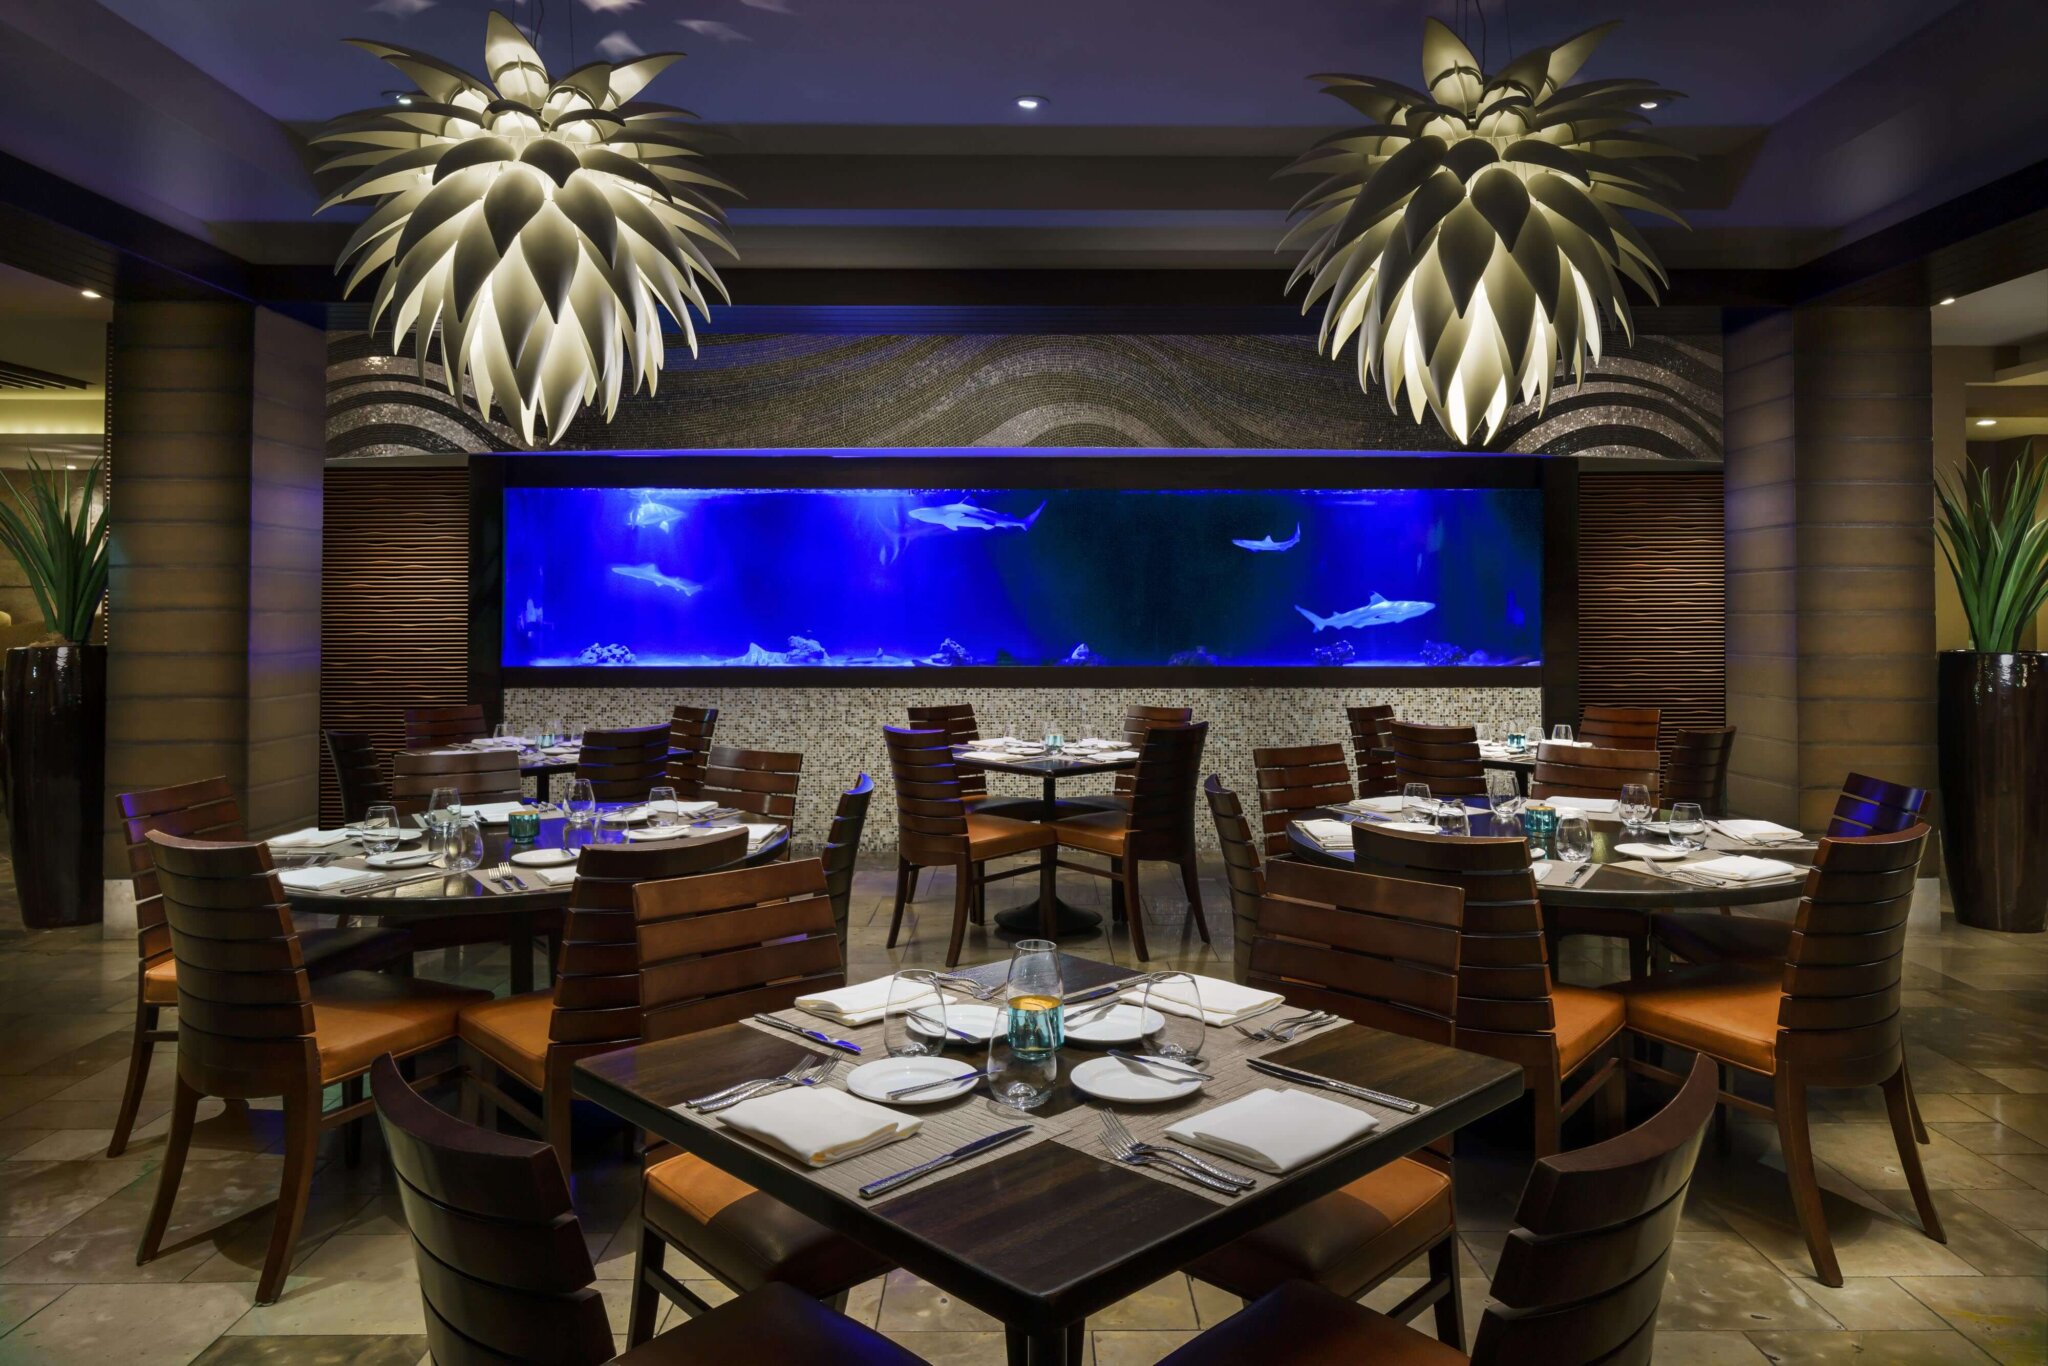 The Atlantic Grille dining room at the Seagate